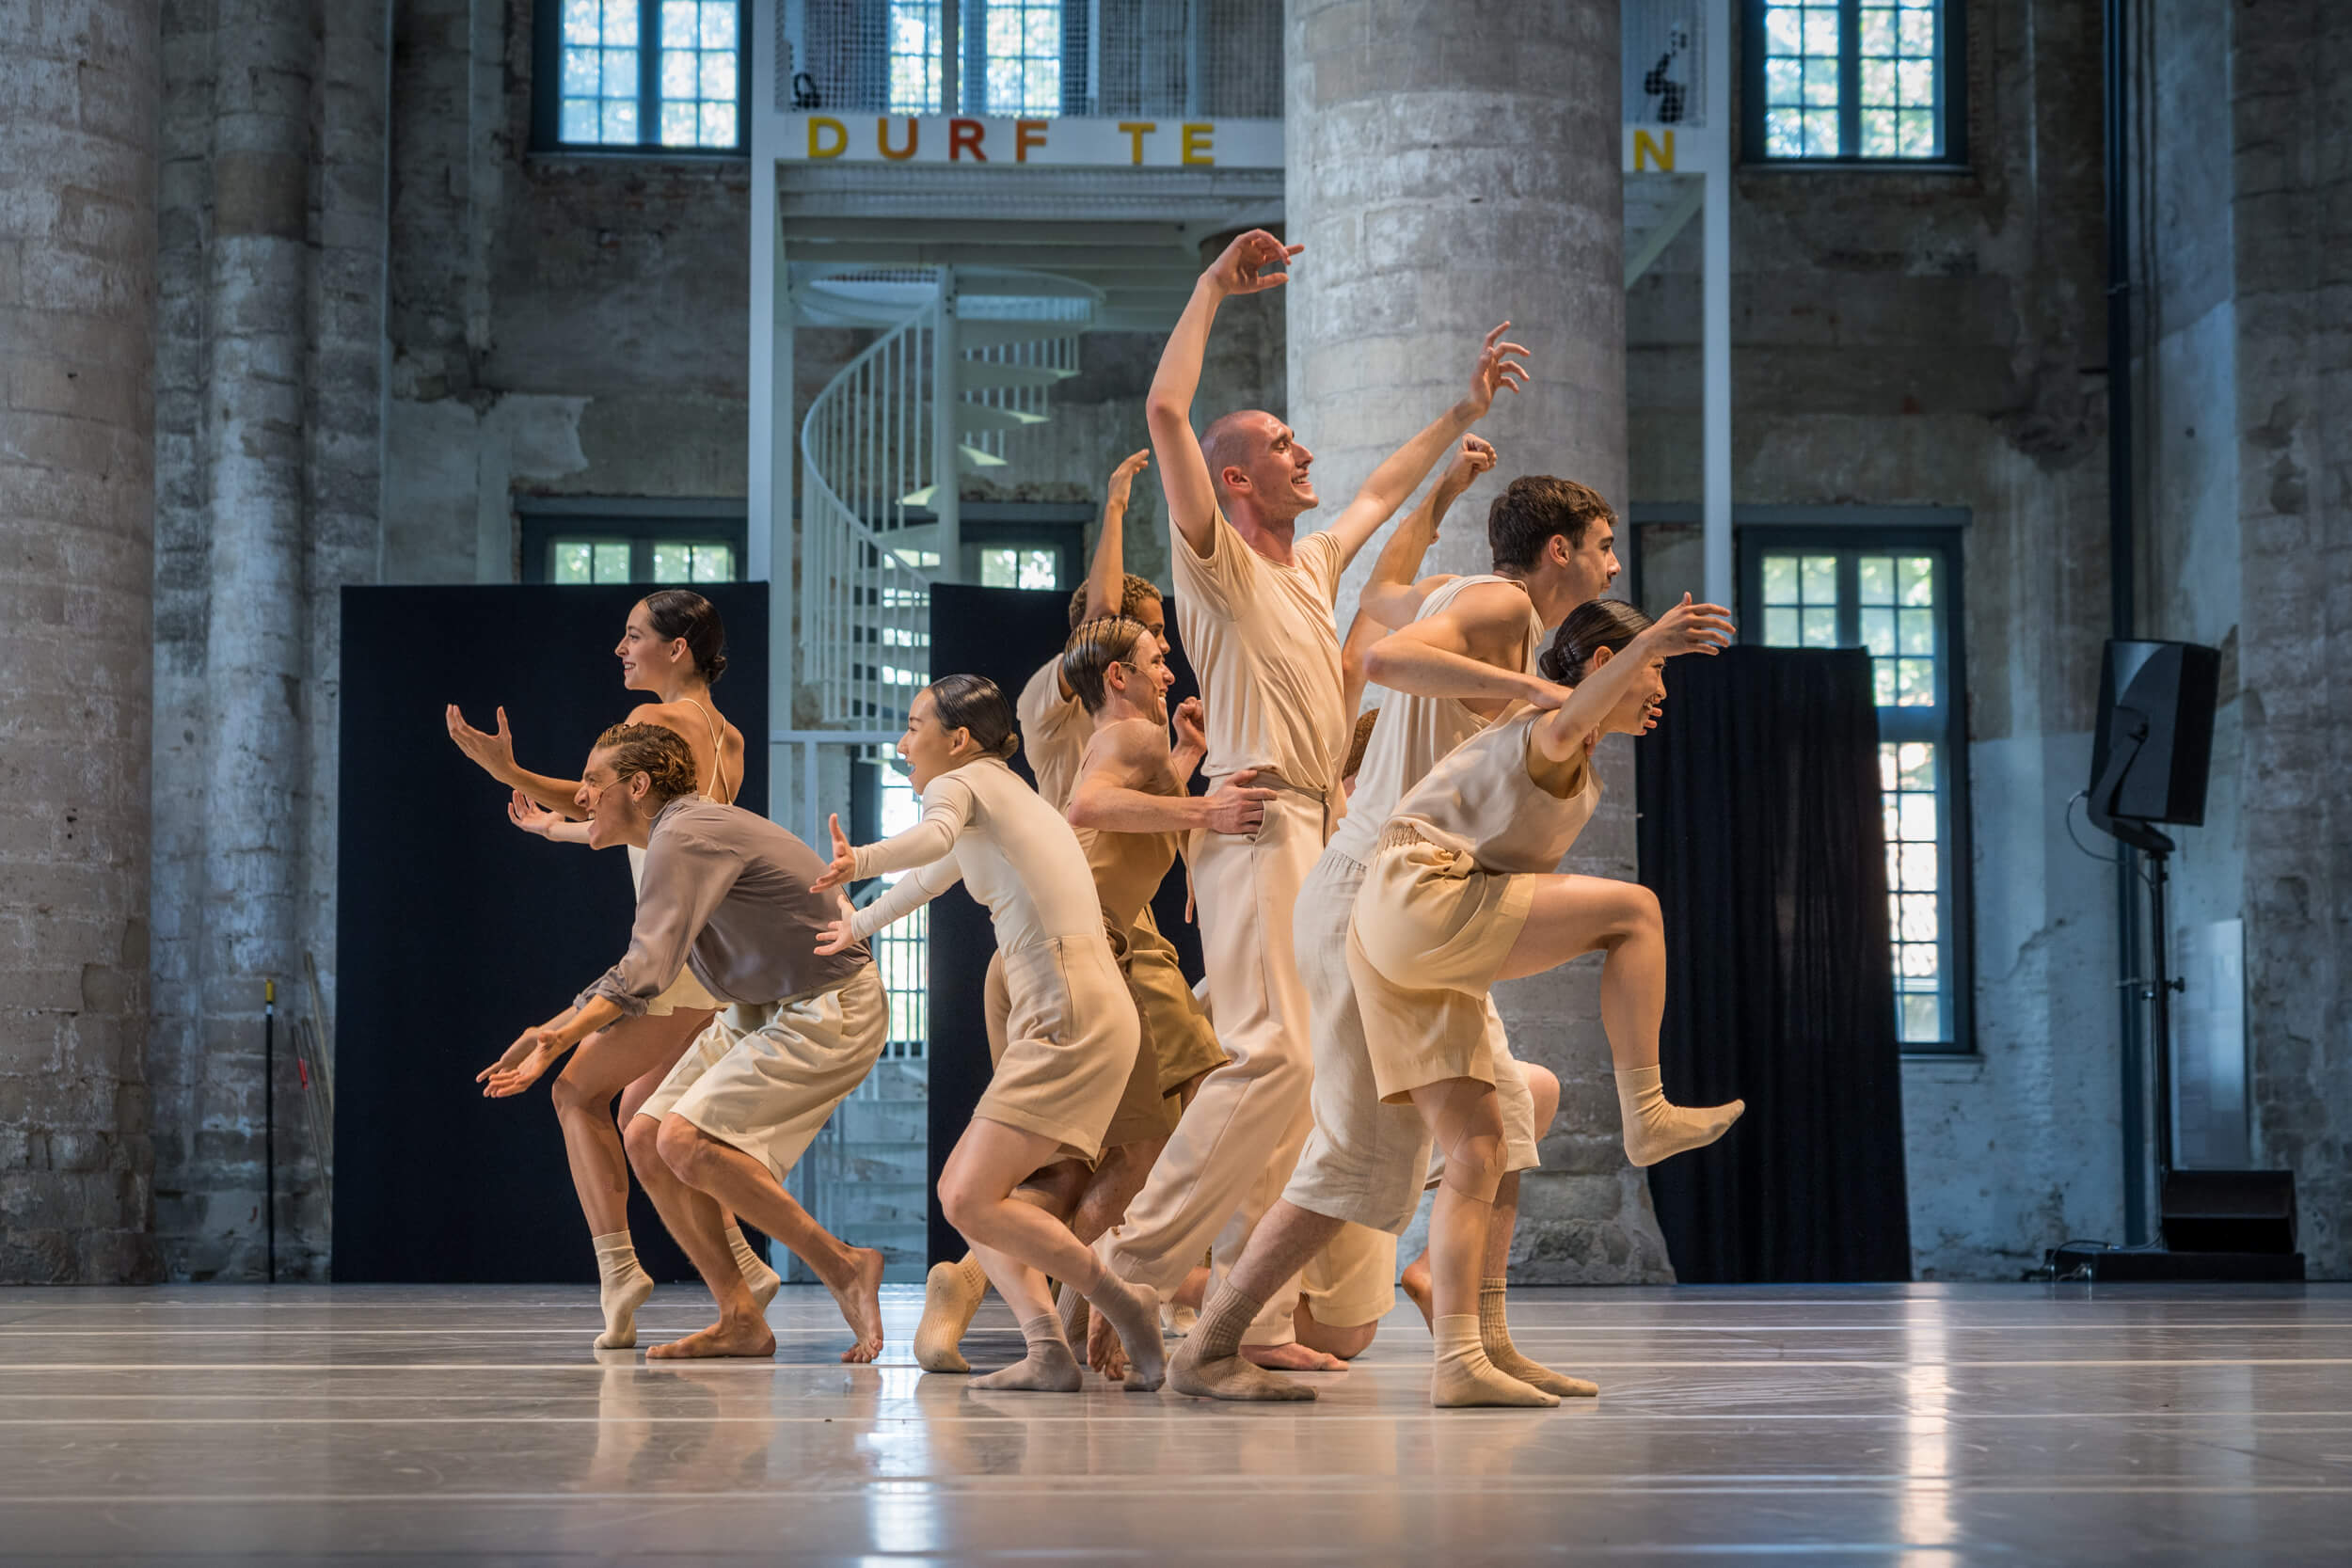 Dancers performing a scene of a modern dance choreography